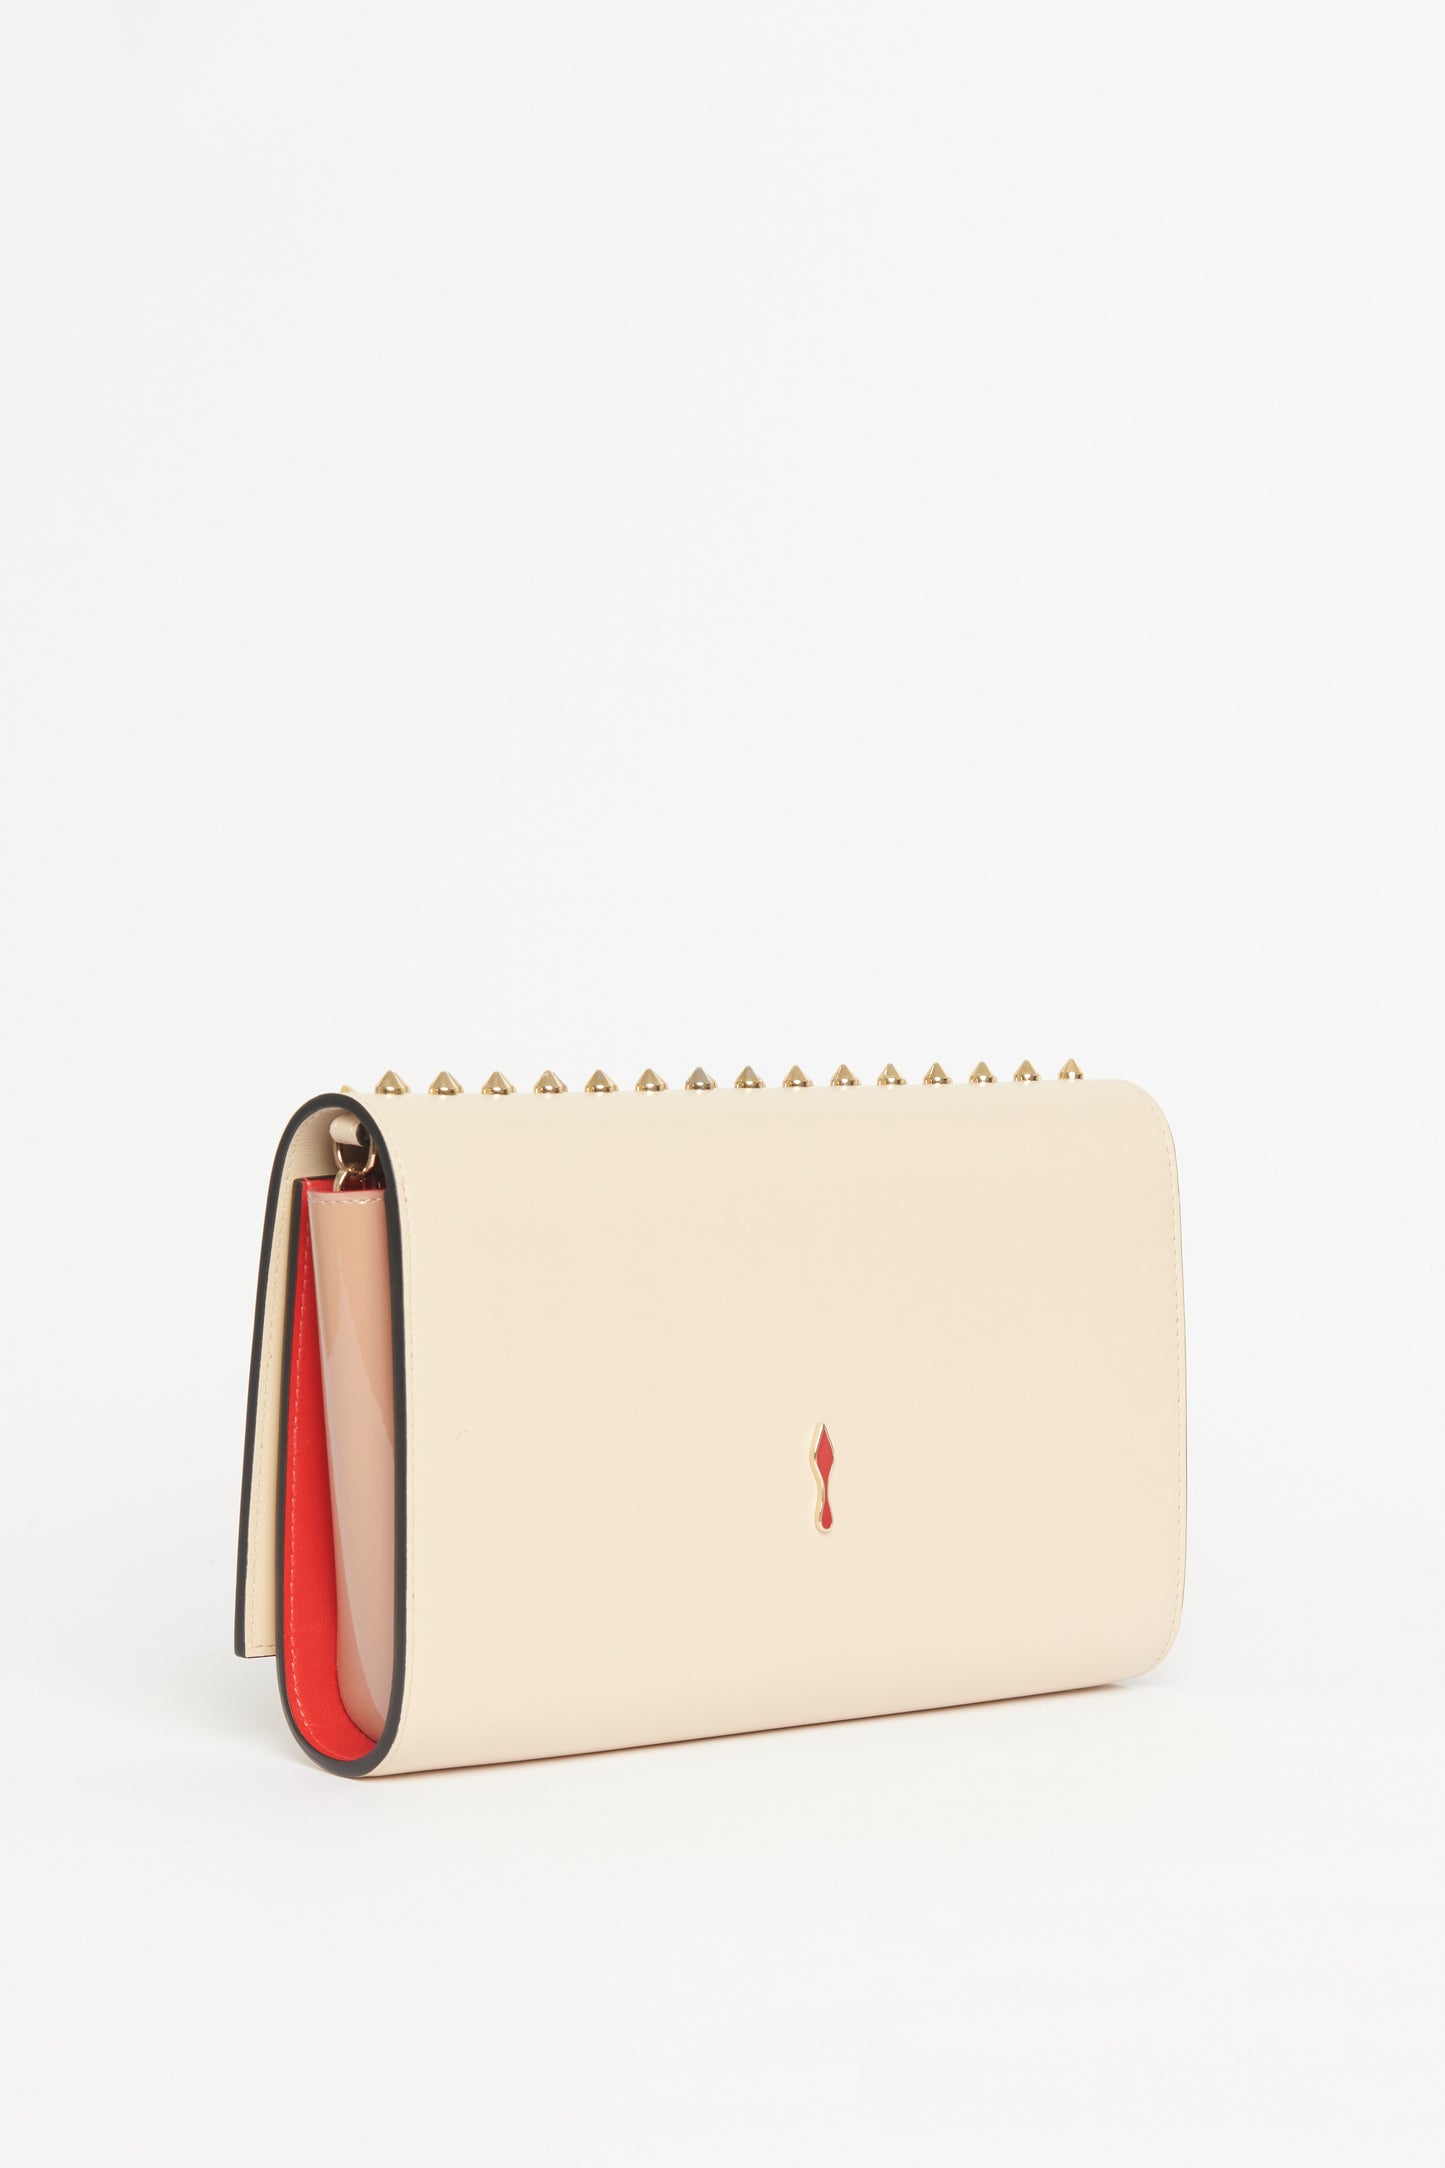 Nude Leather Preowned Paloma Spike Clutch Bag With Chain